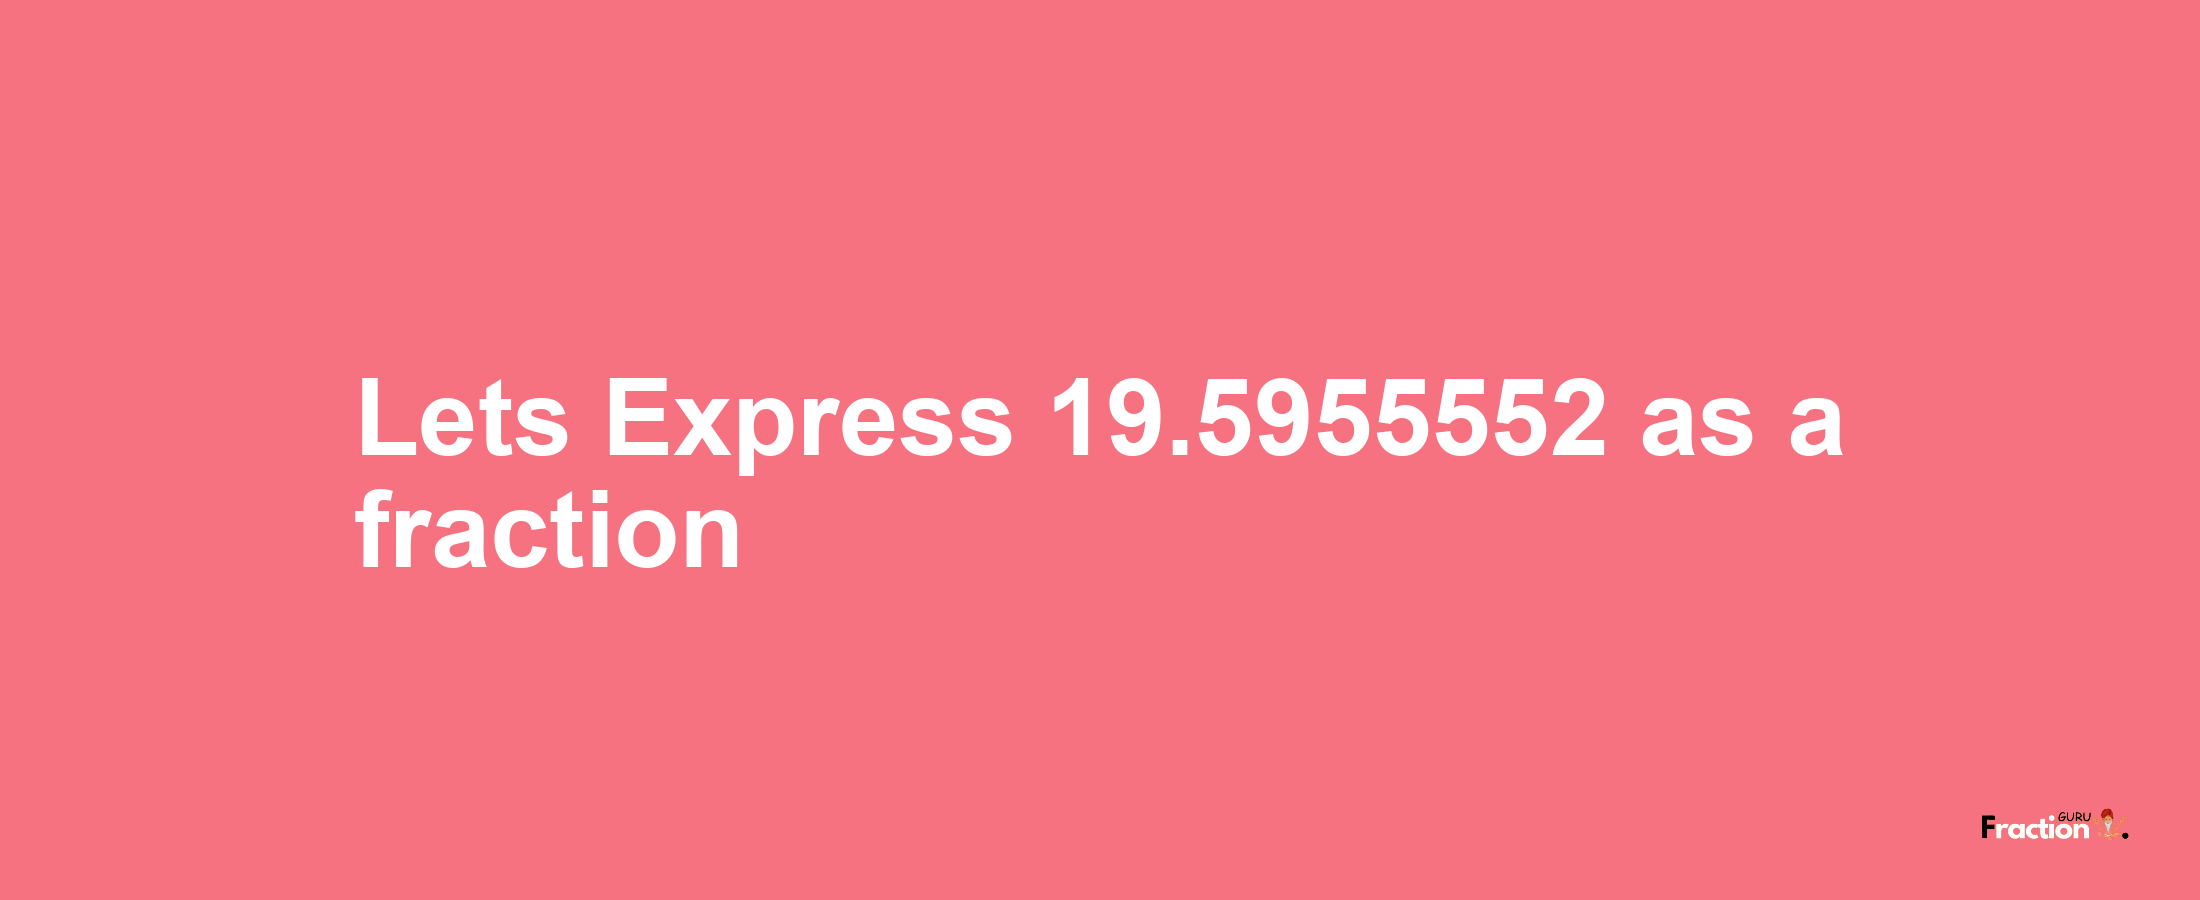 Lets Express 19.5955552 as afraction